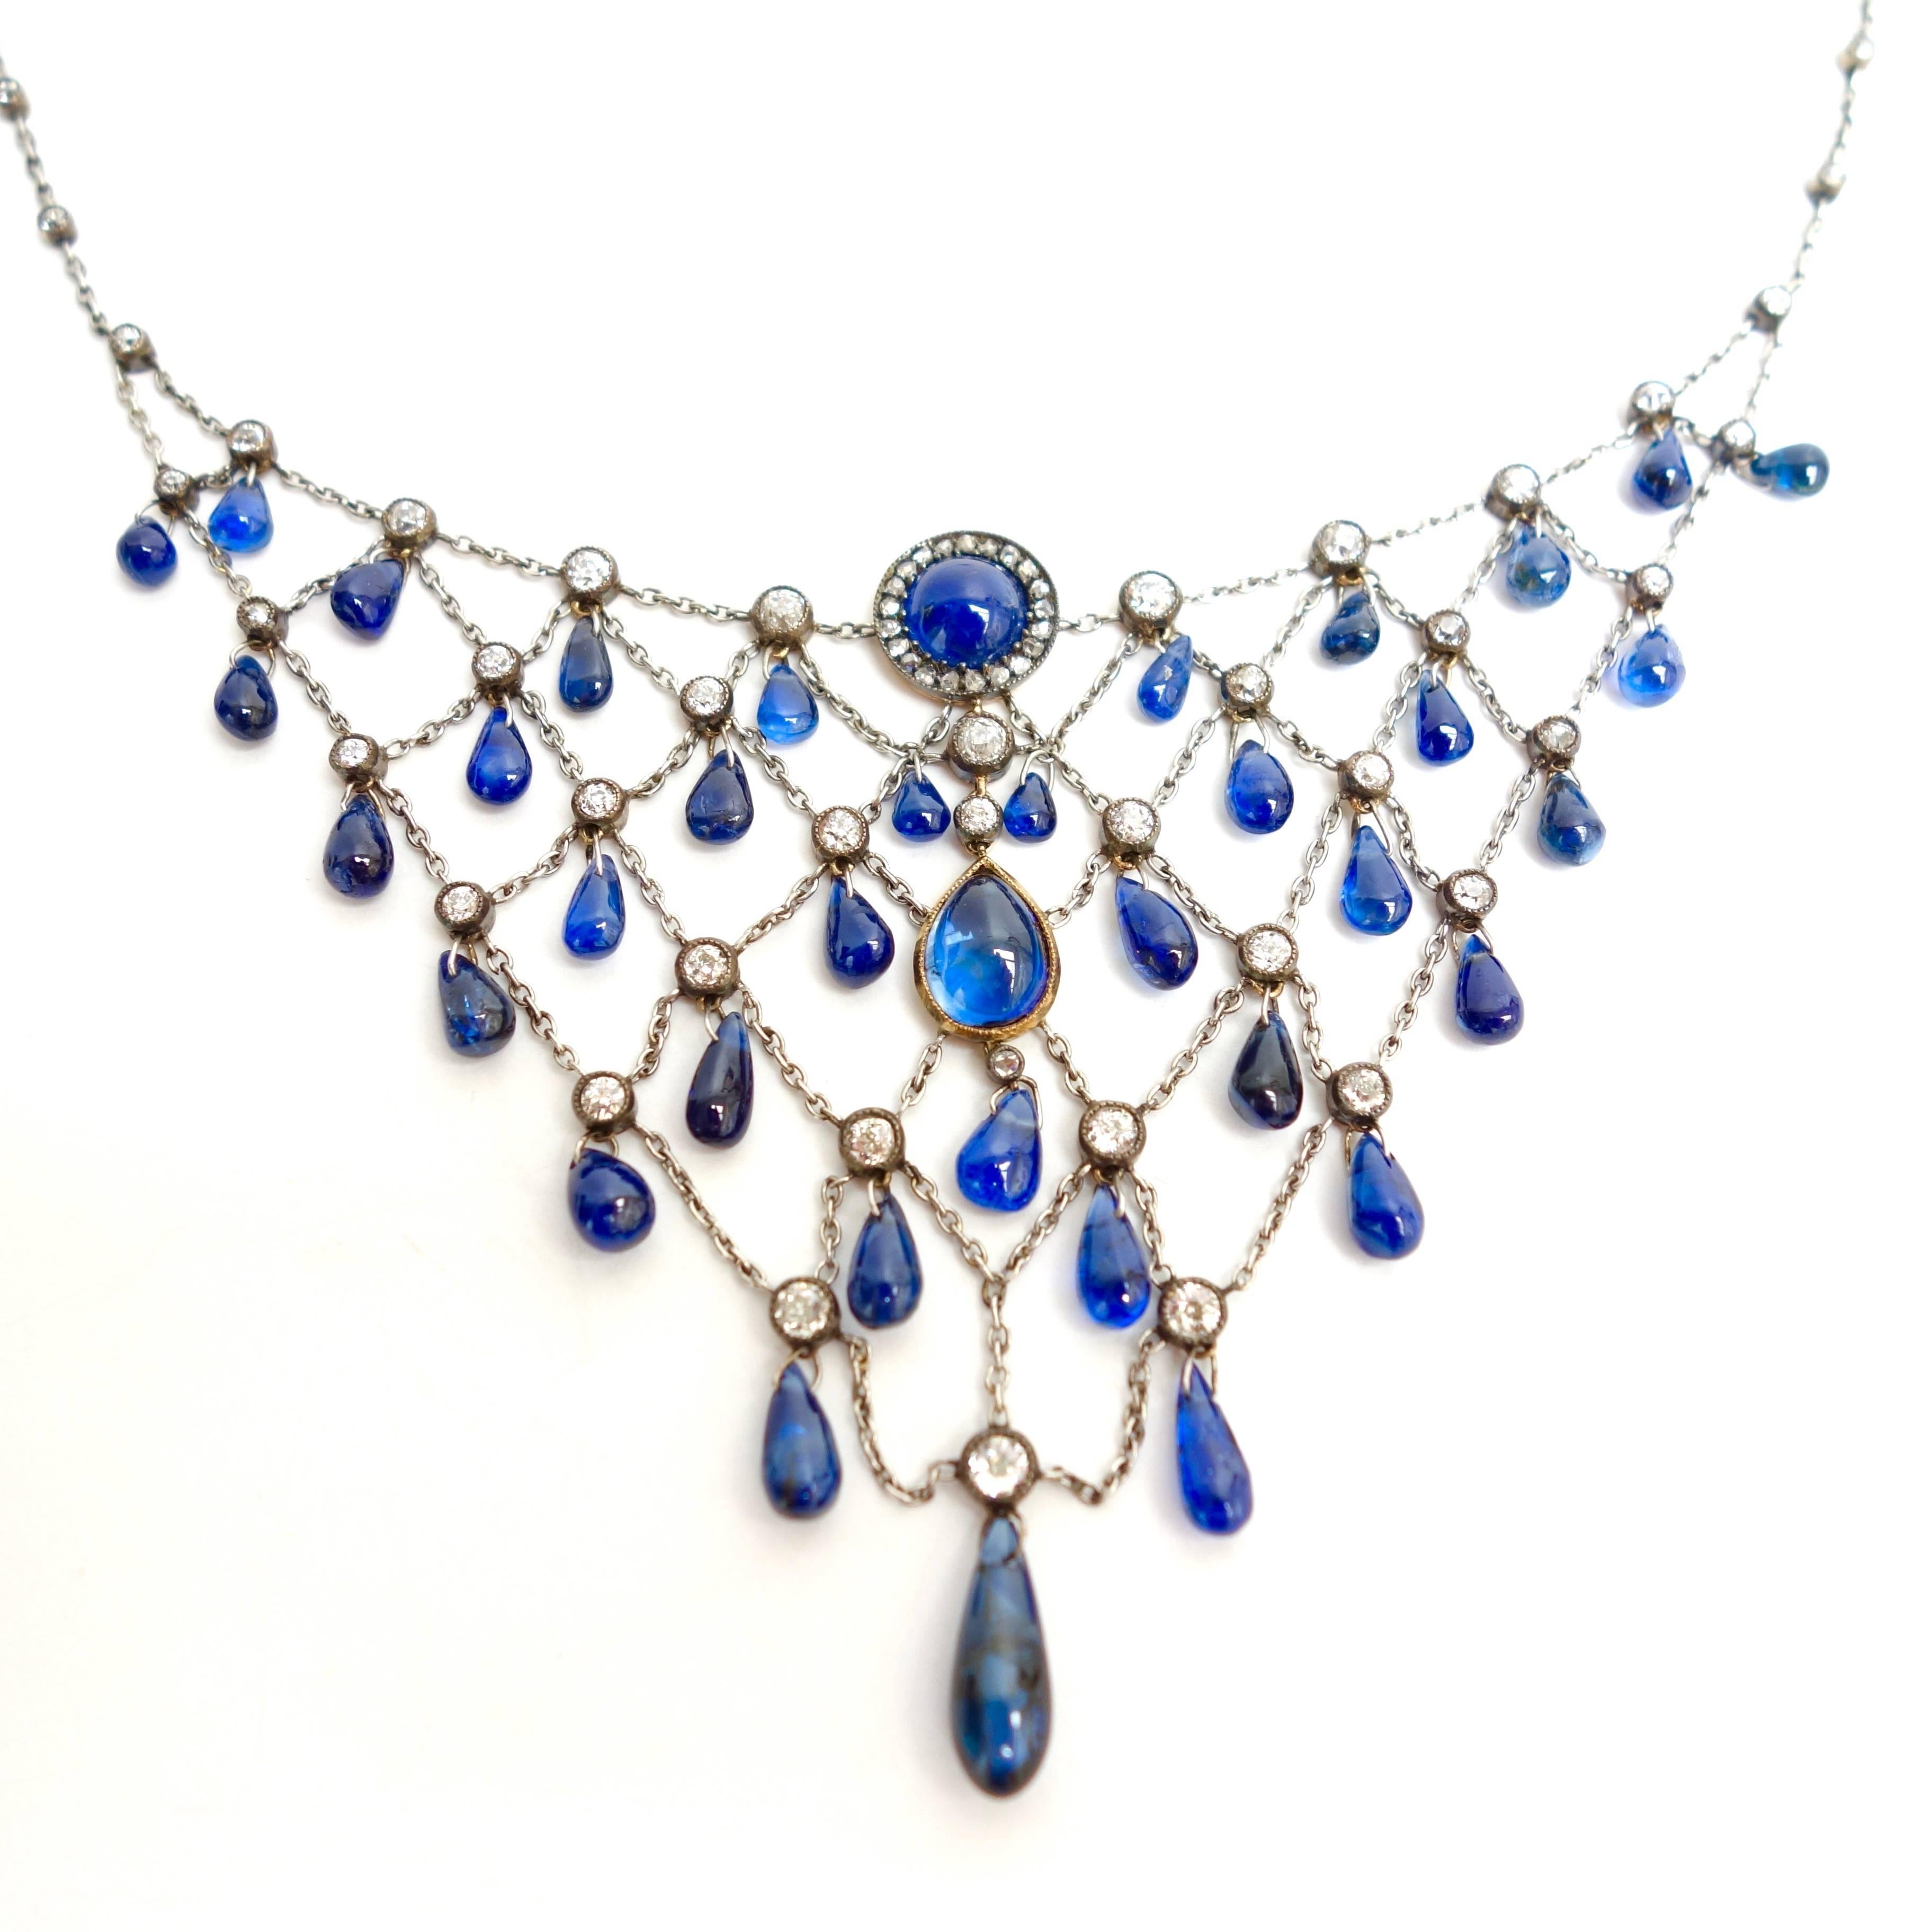 Gorgeous Edwardian Sapphire and Diamond Necklace In Excellent Condition For Sale In Agoura Hills, CA